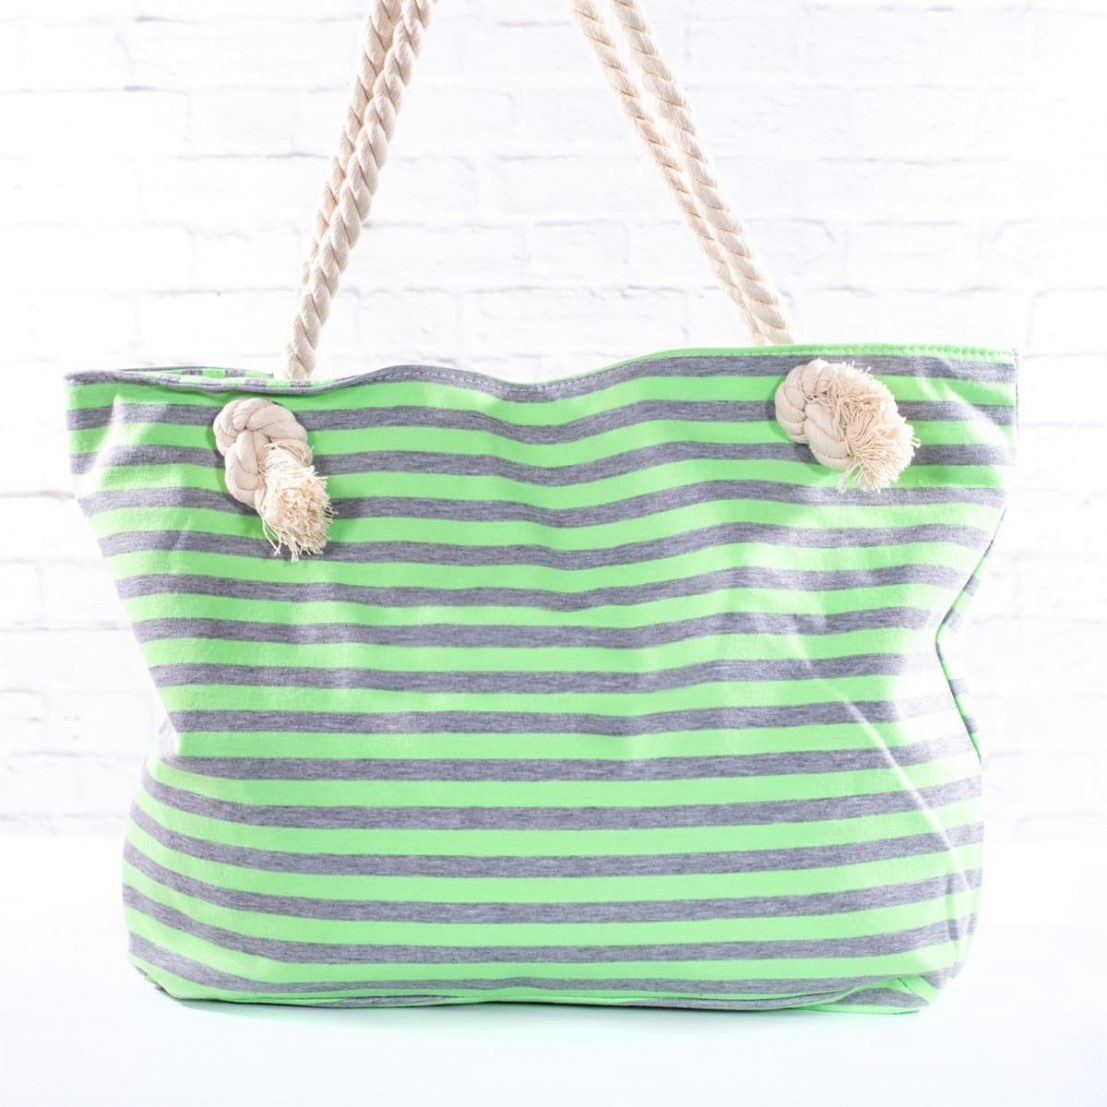 Striped Tote Bags with Nautical Rope Handles for $8.99 Shipped (Reg $24 ...